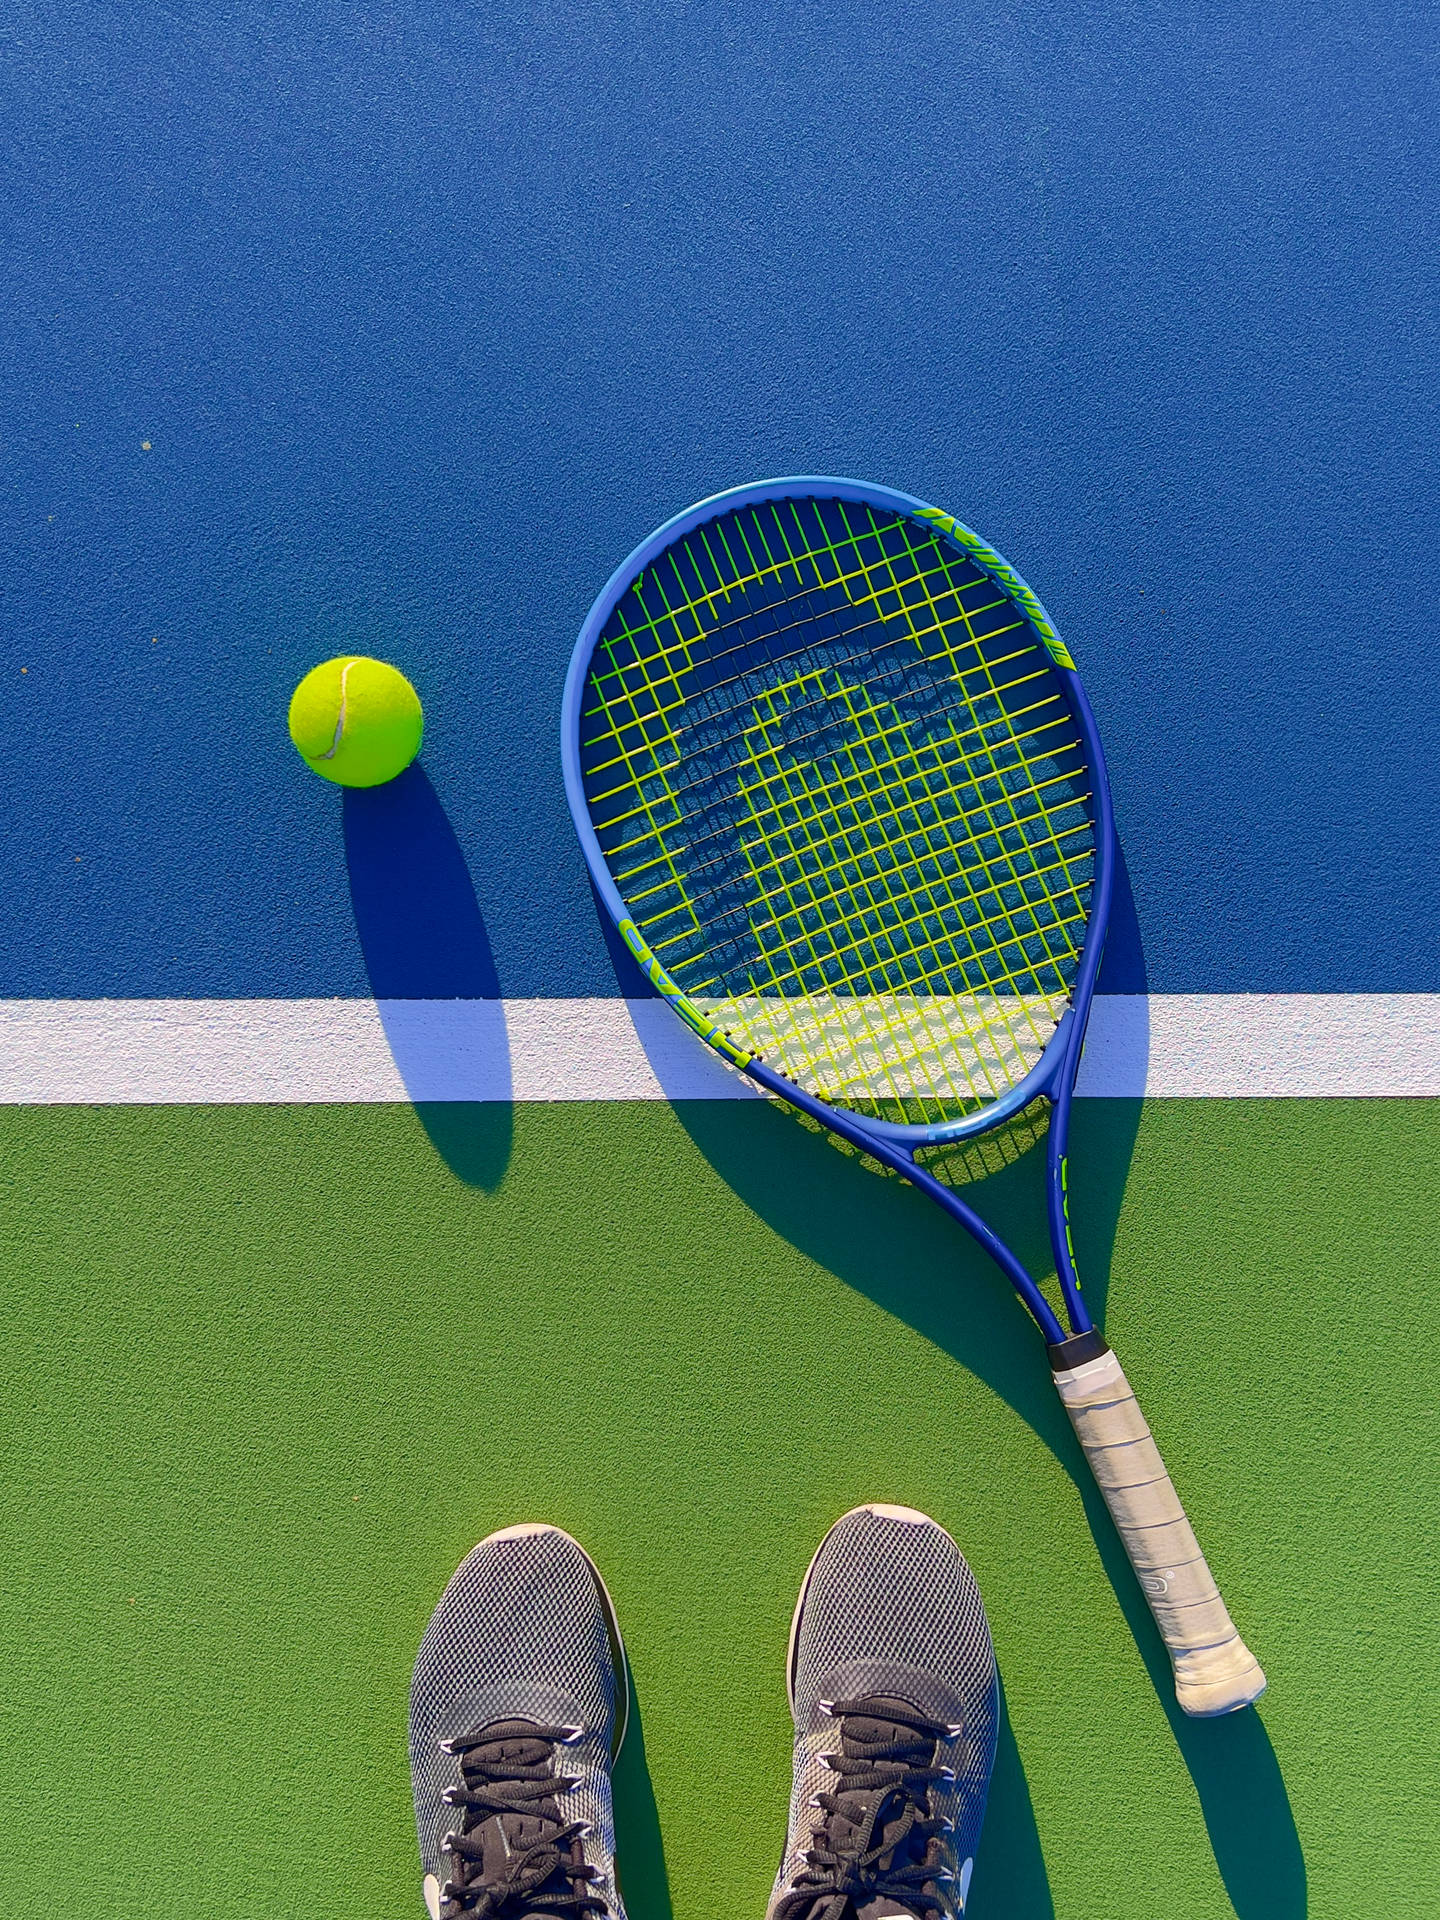 Tennis 2518X3357 Wallpaper and Background Image